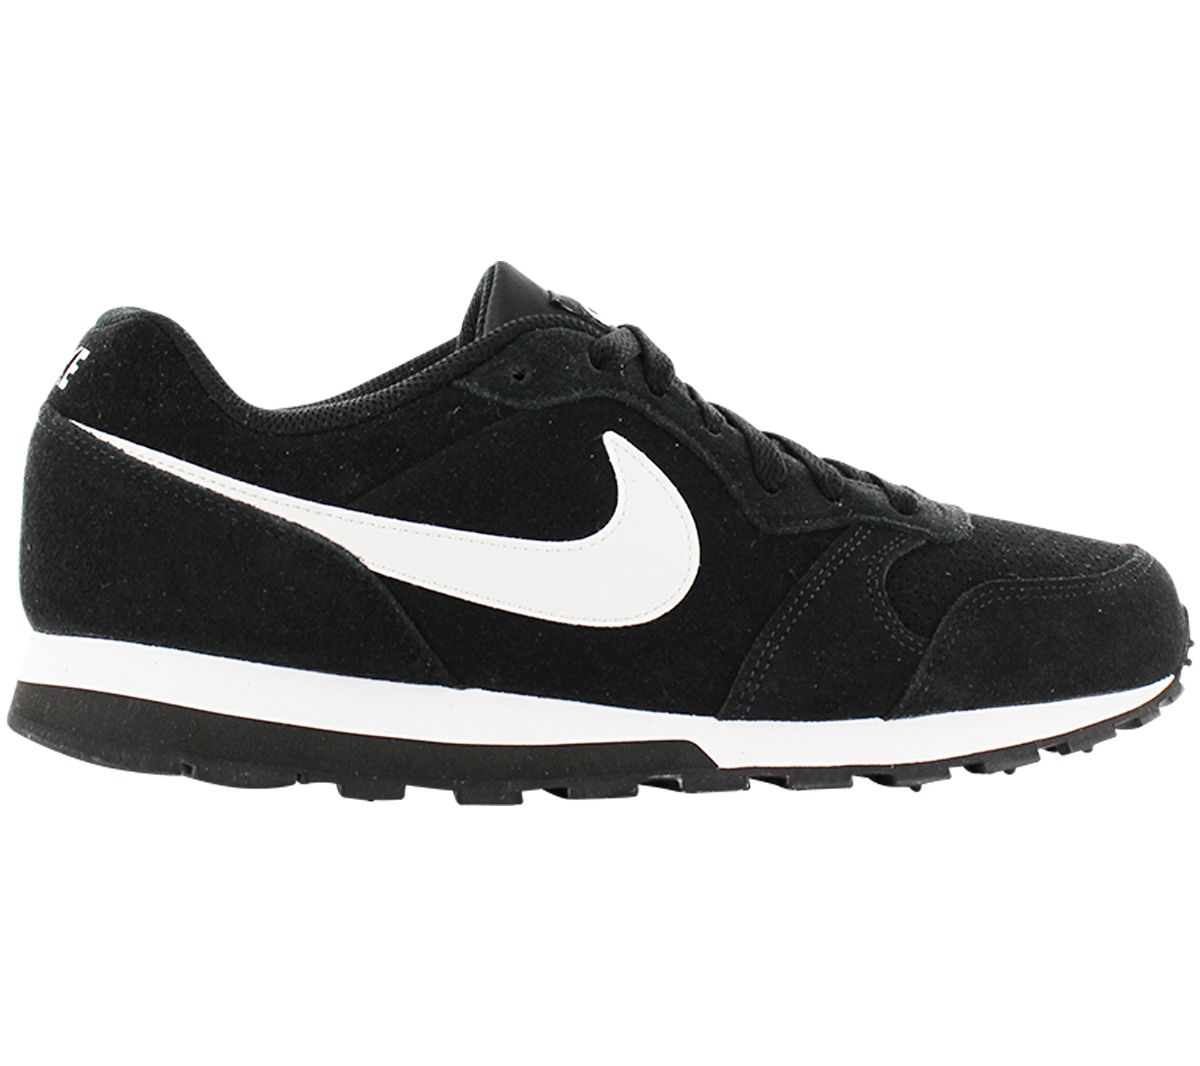 NEW Nike MD Runner 2 Suede AQ9211-004 Men´s Shoes Trainers Sneakers SALE |  eBay